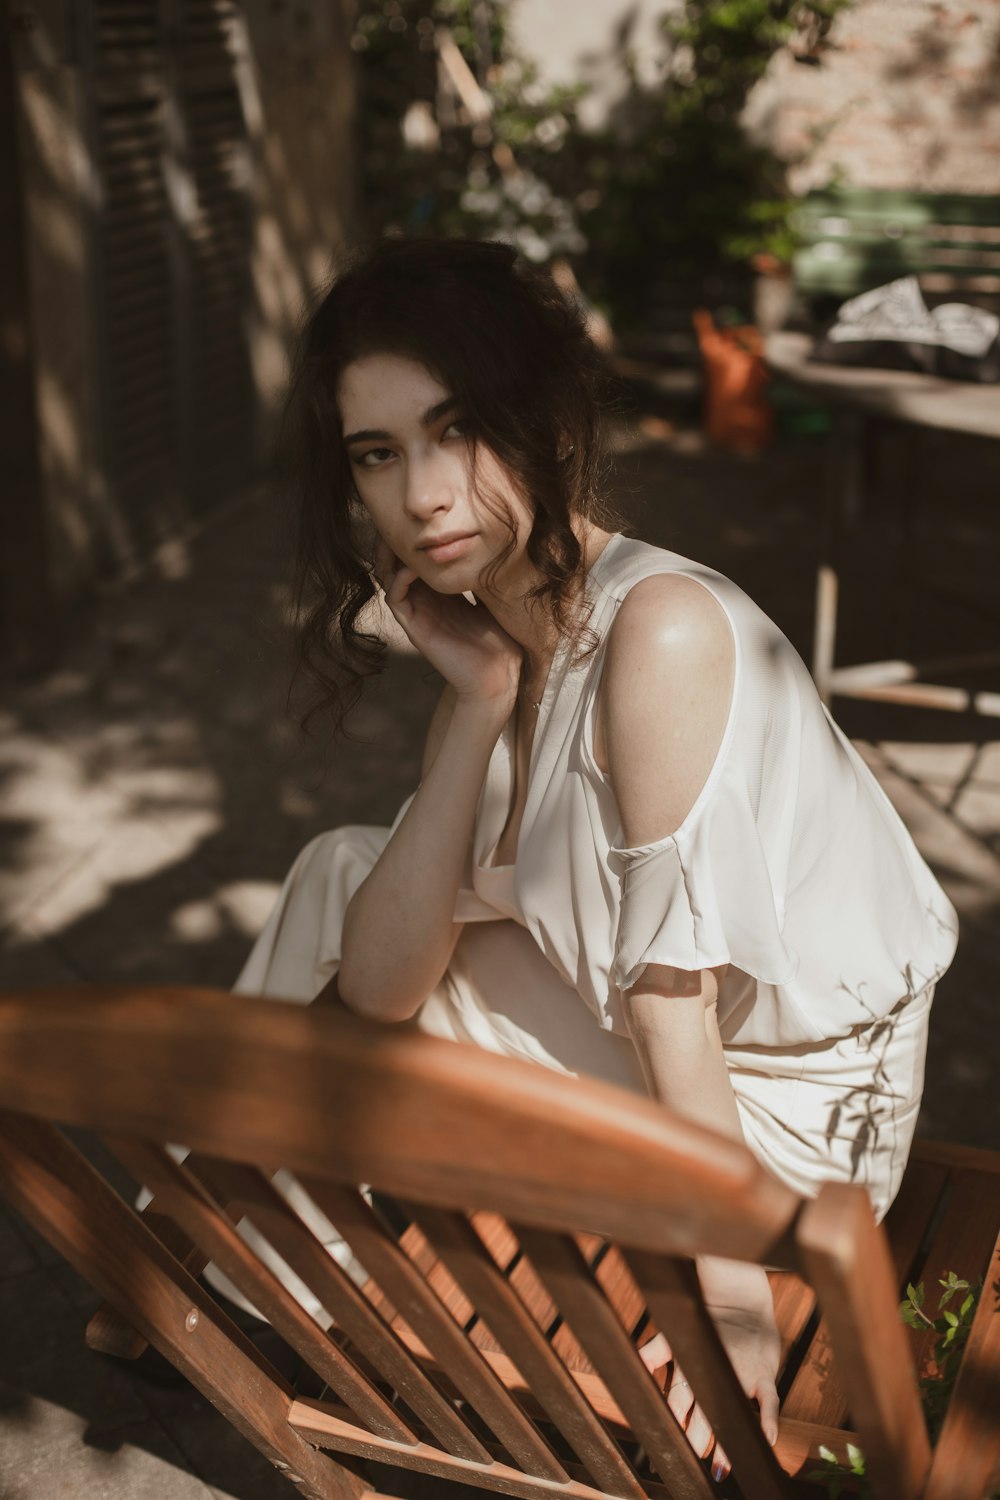 woman in white sleeveless dress sitting on brown wooden bench